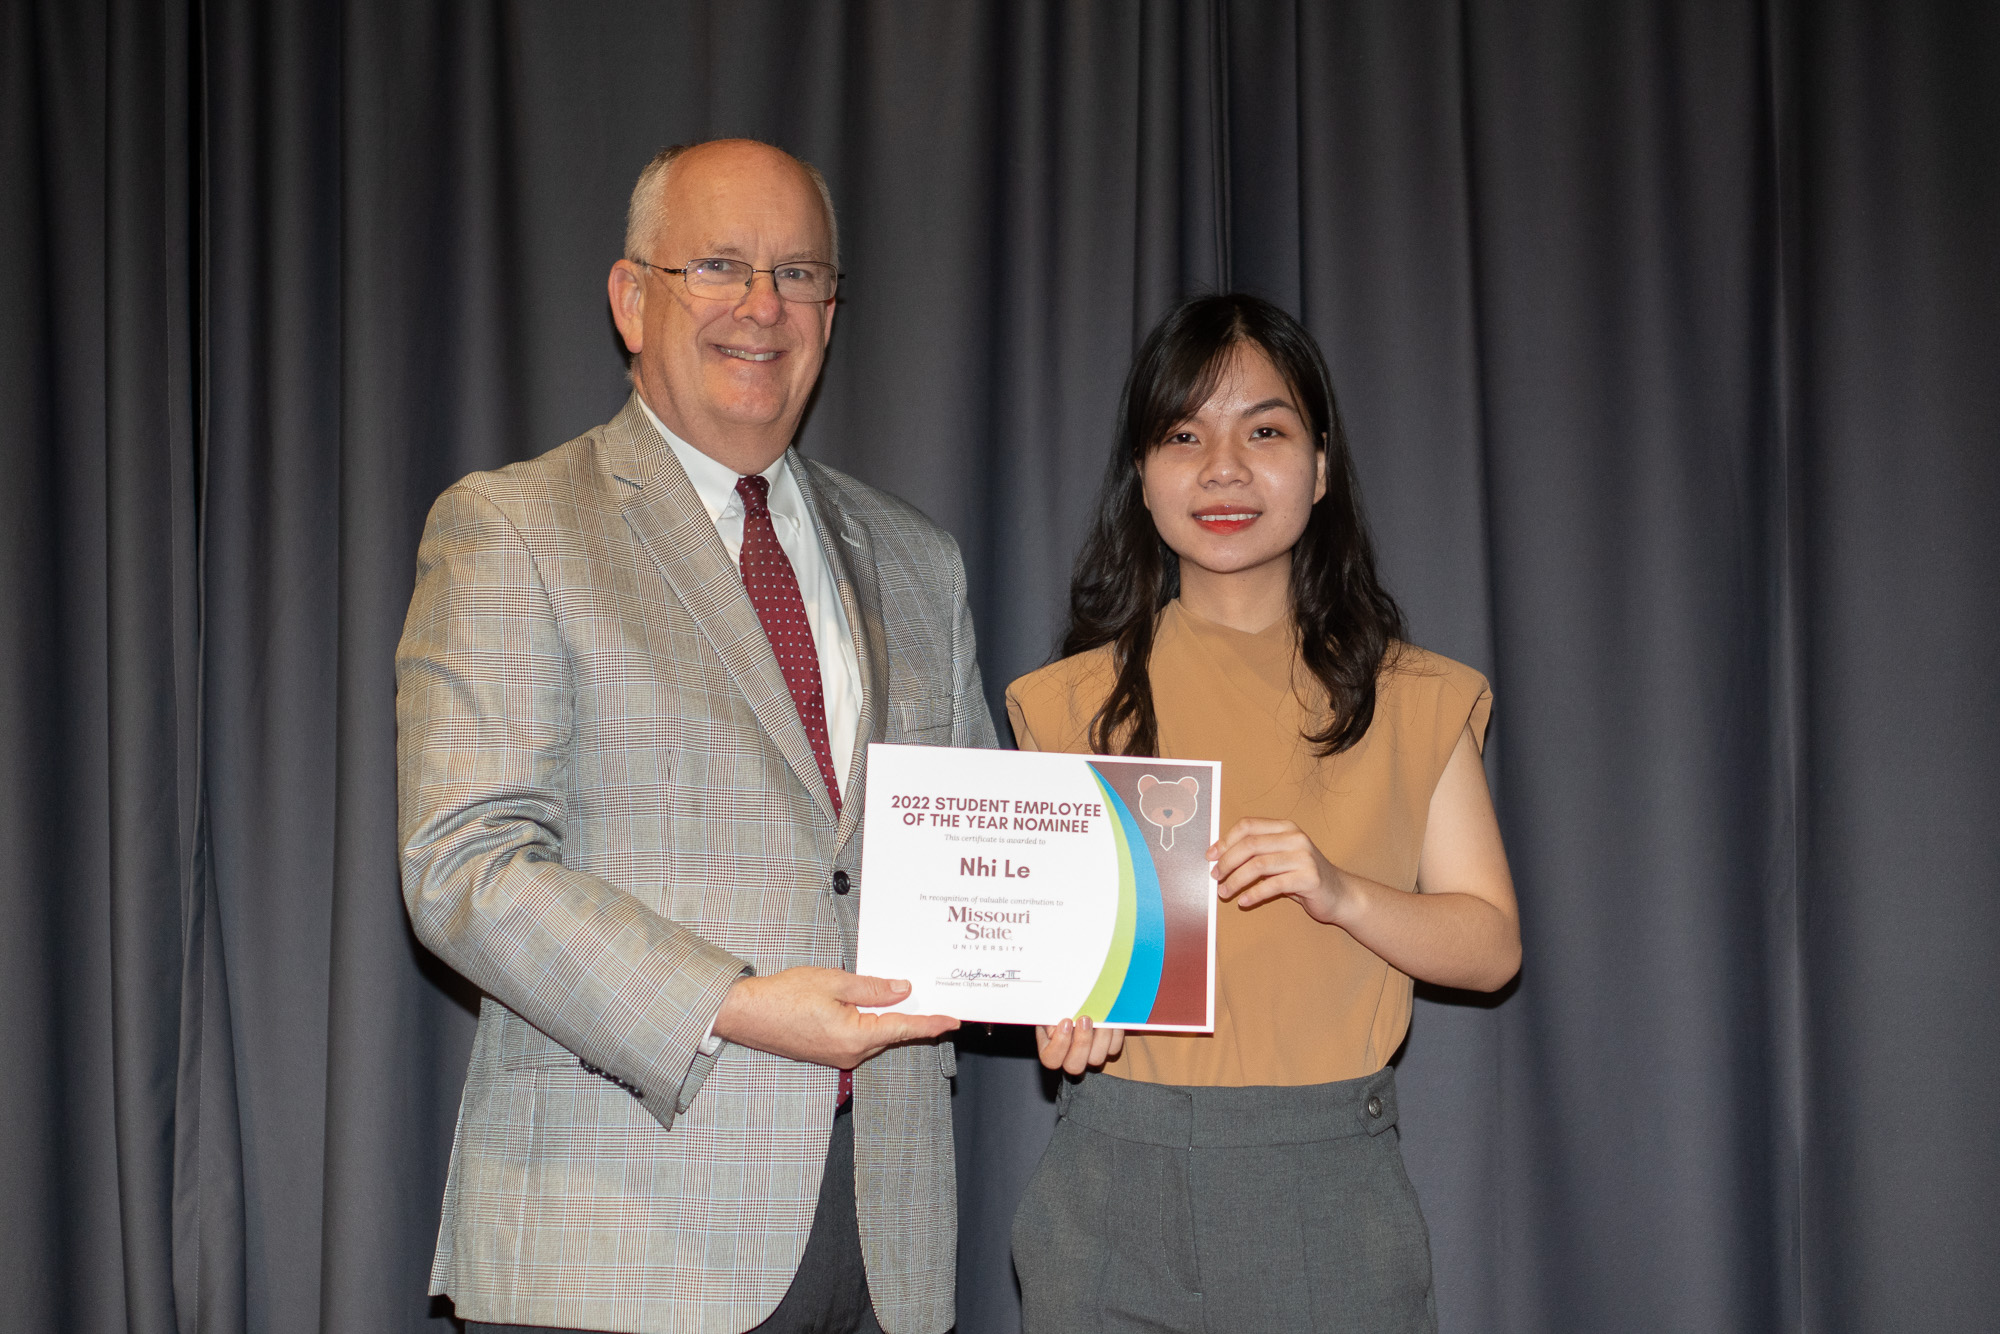 2022 Student Employee of the year Nhi Lee with President Smart